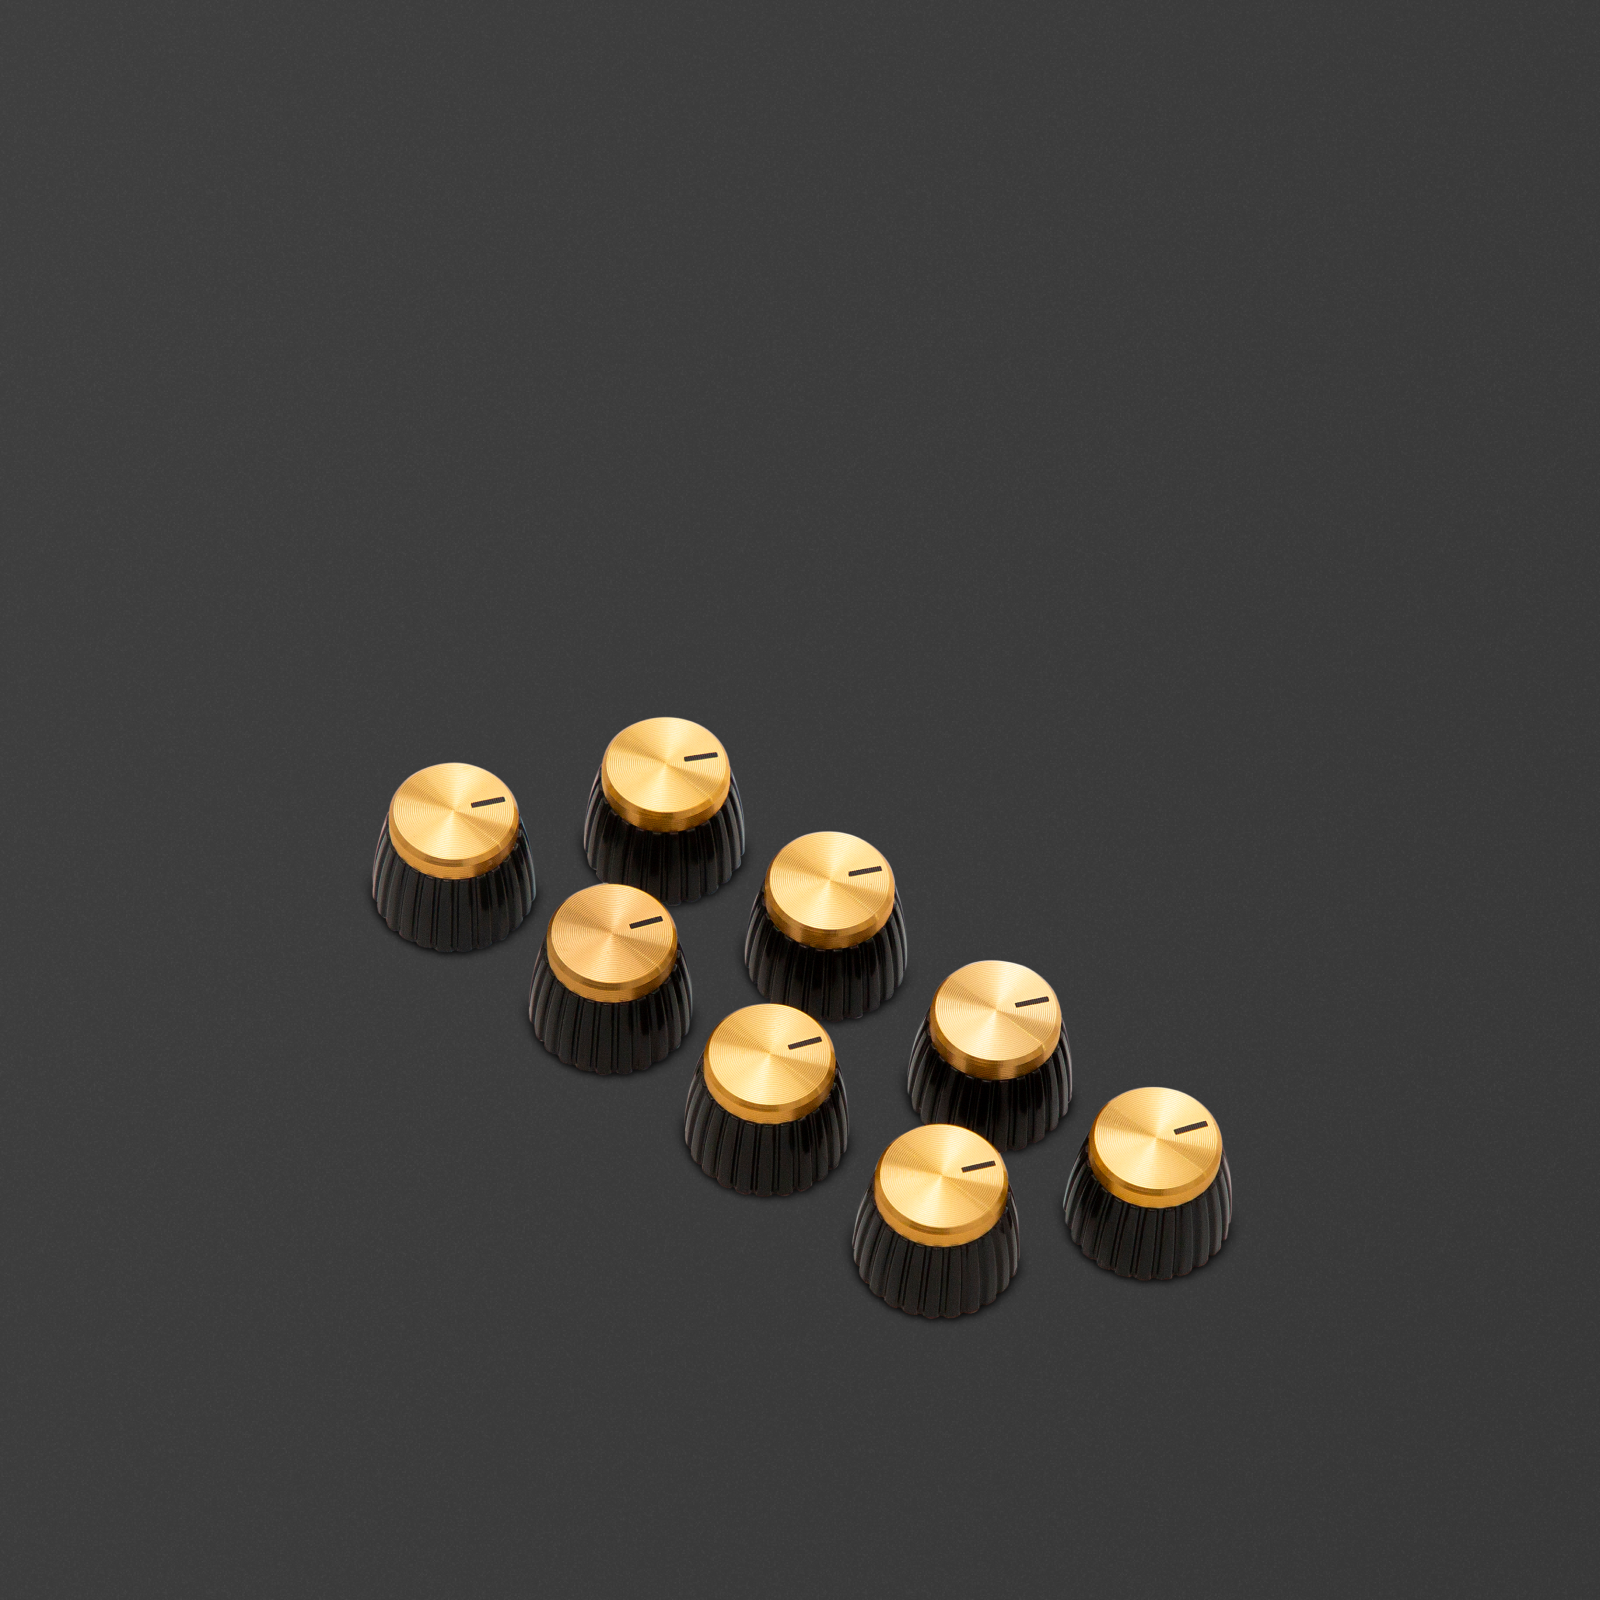 Pack of 8 gold d-shaft knobs where the marker points to the round side of the d-shaft